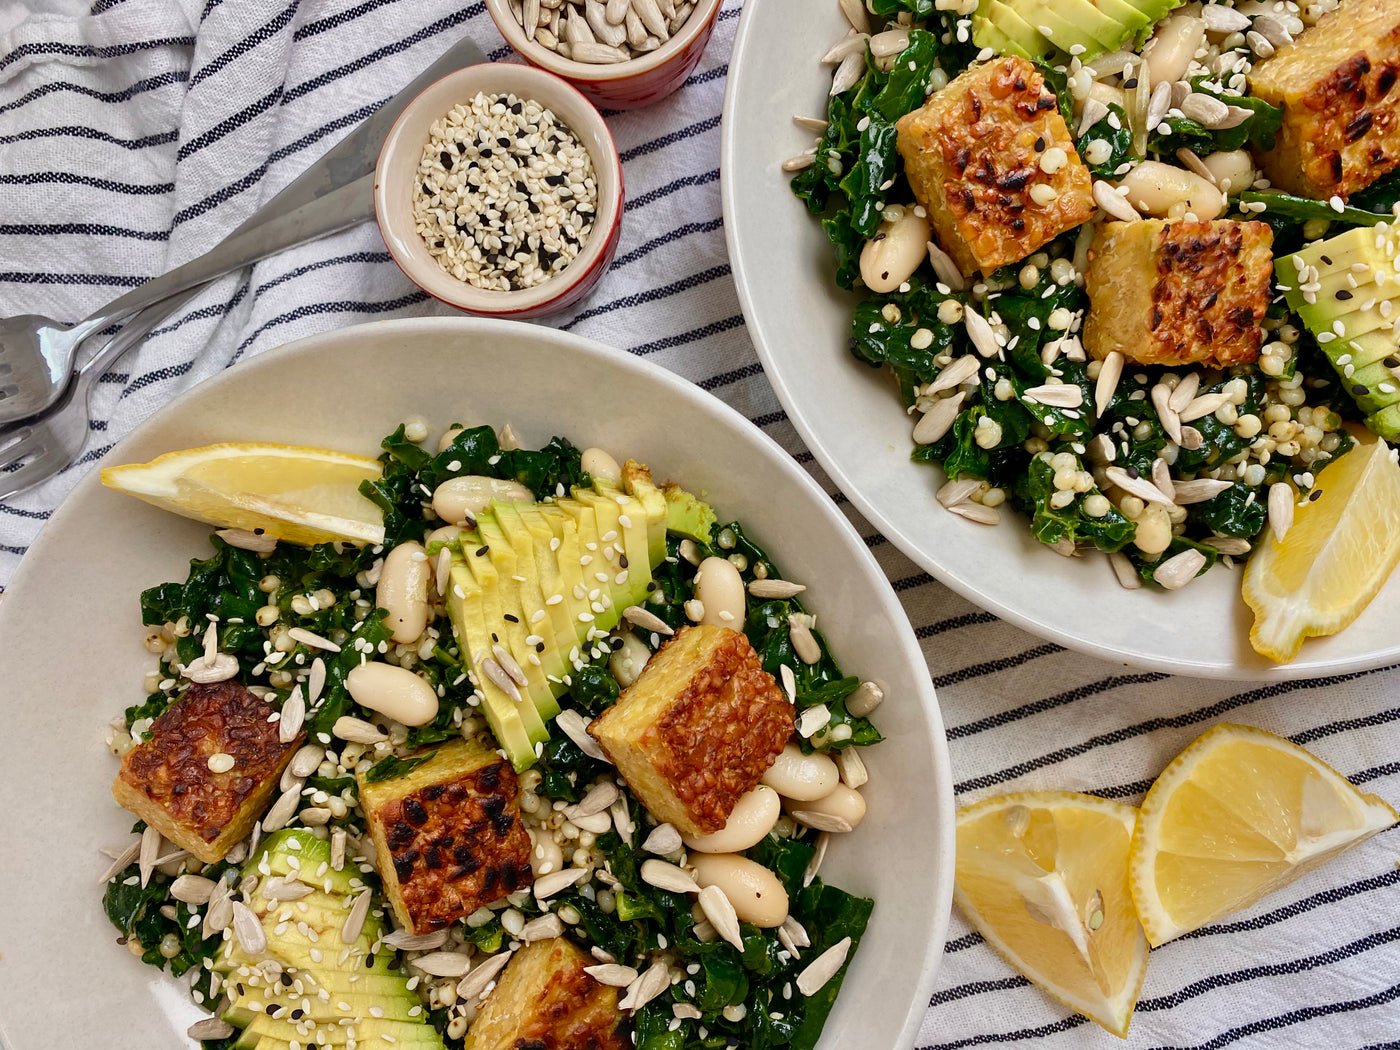 Lemony Kale, White Bean & Avocado Salad with Couscous and Tempeh